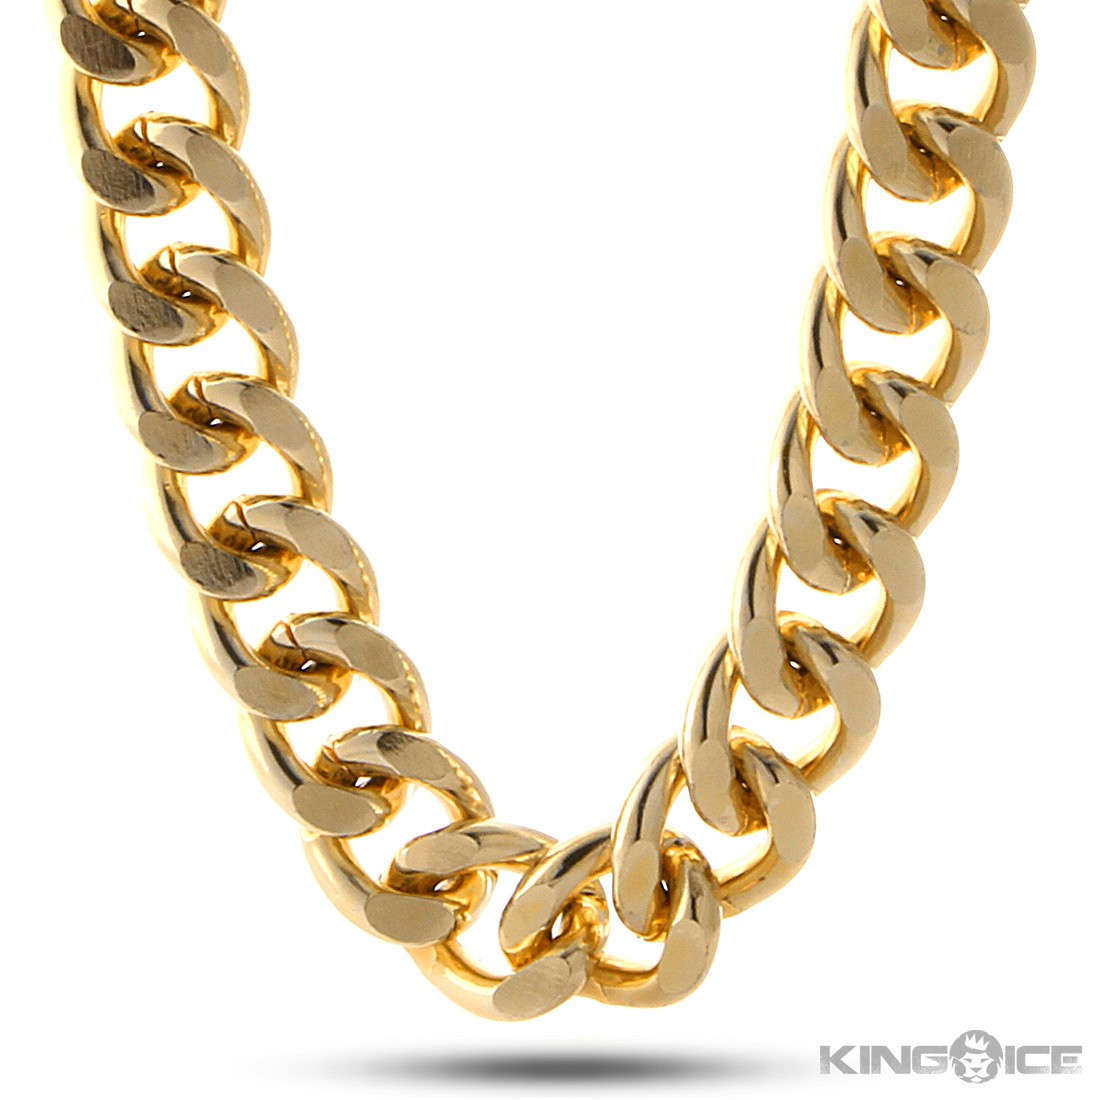 chain of gold series